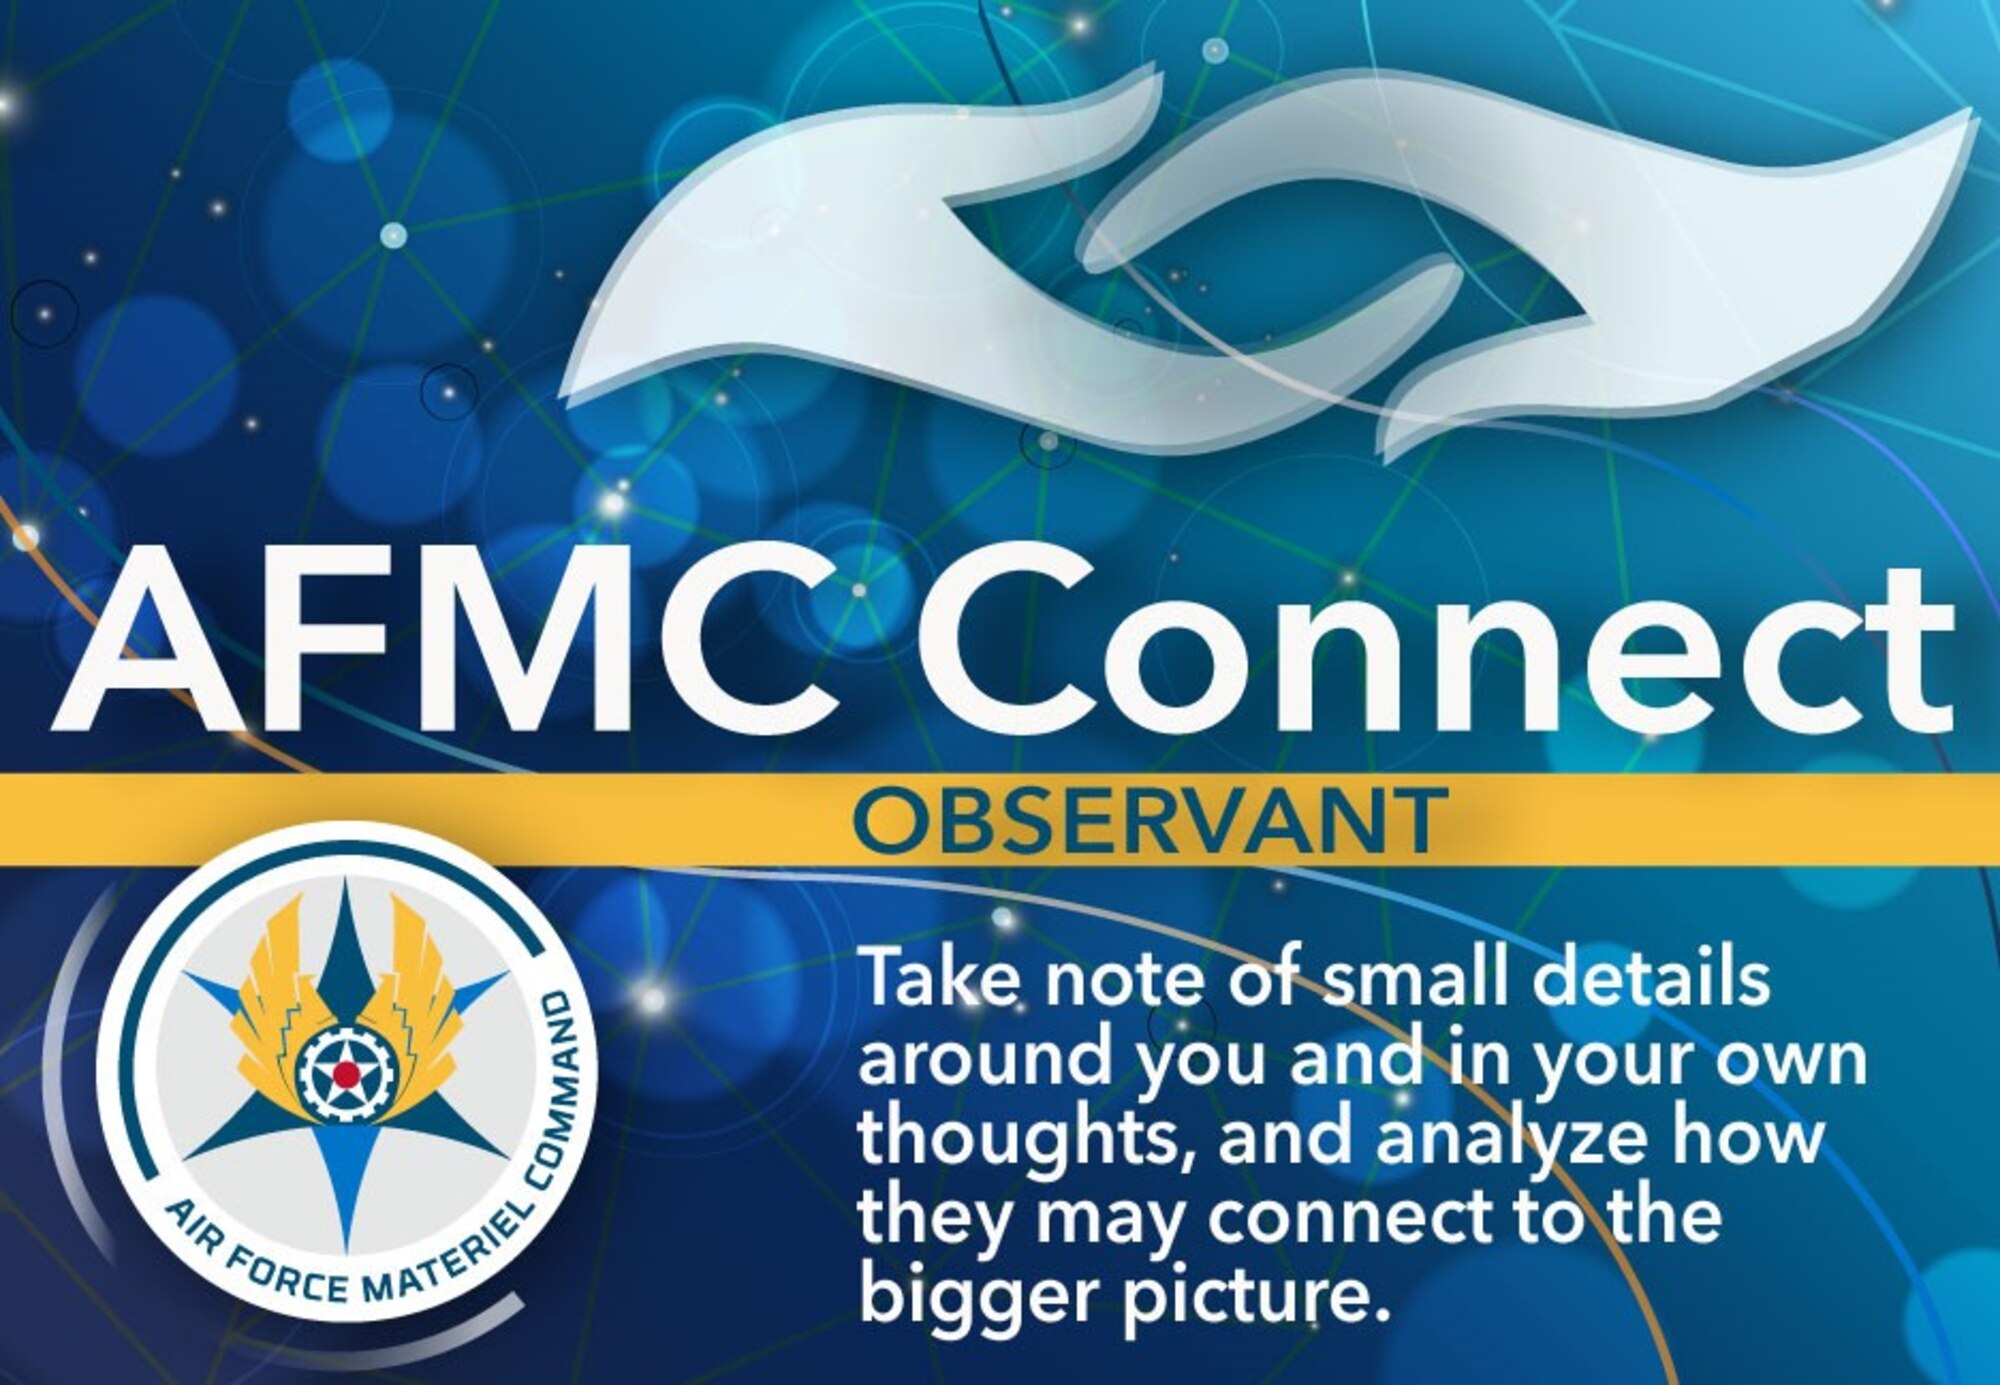 AFMC Connect, Observant